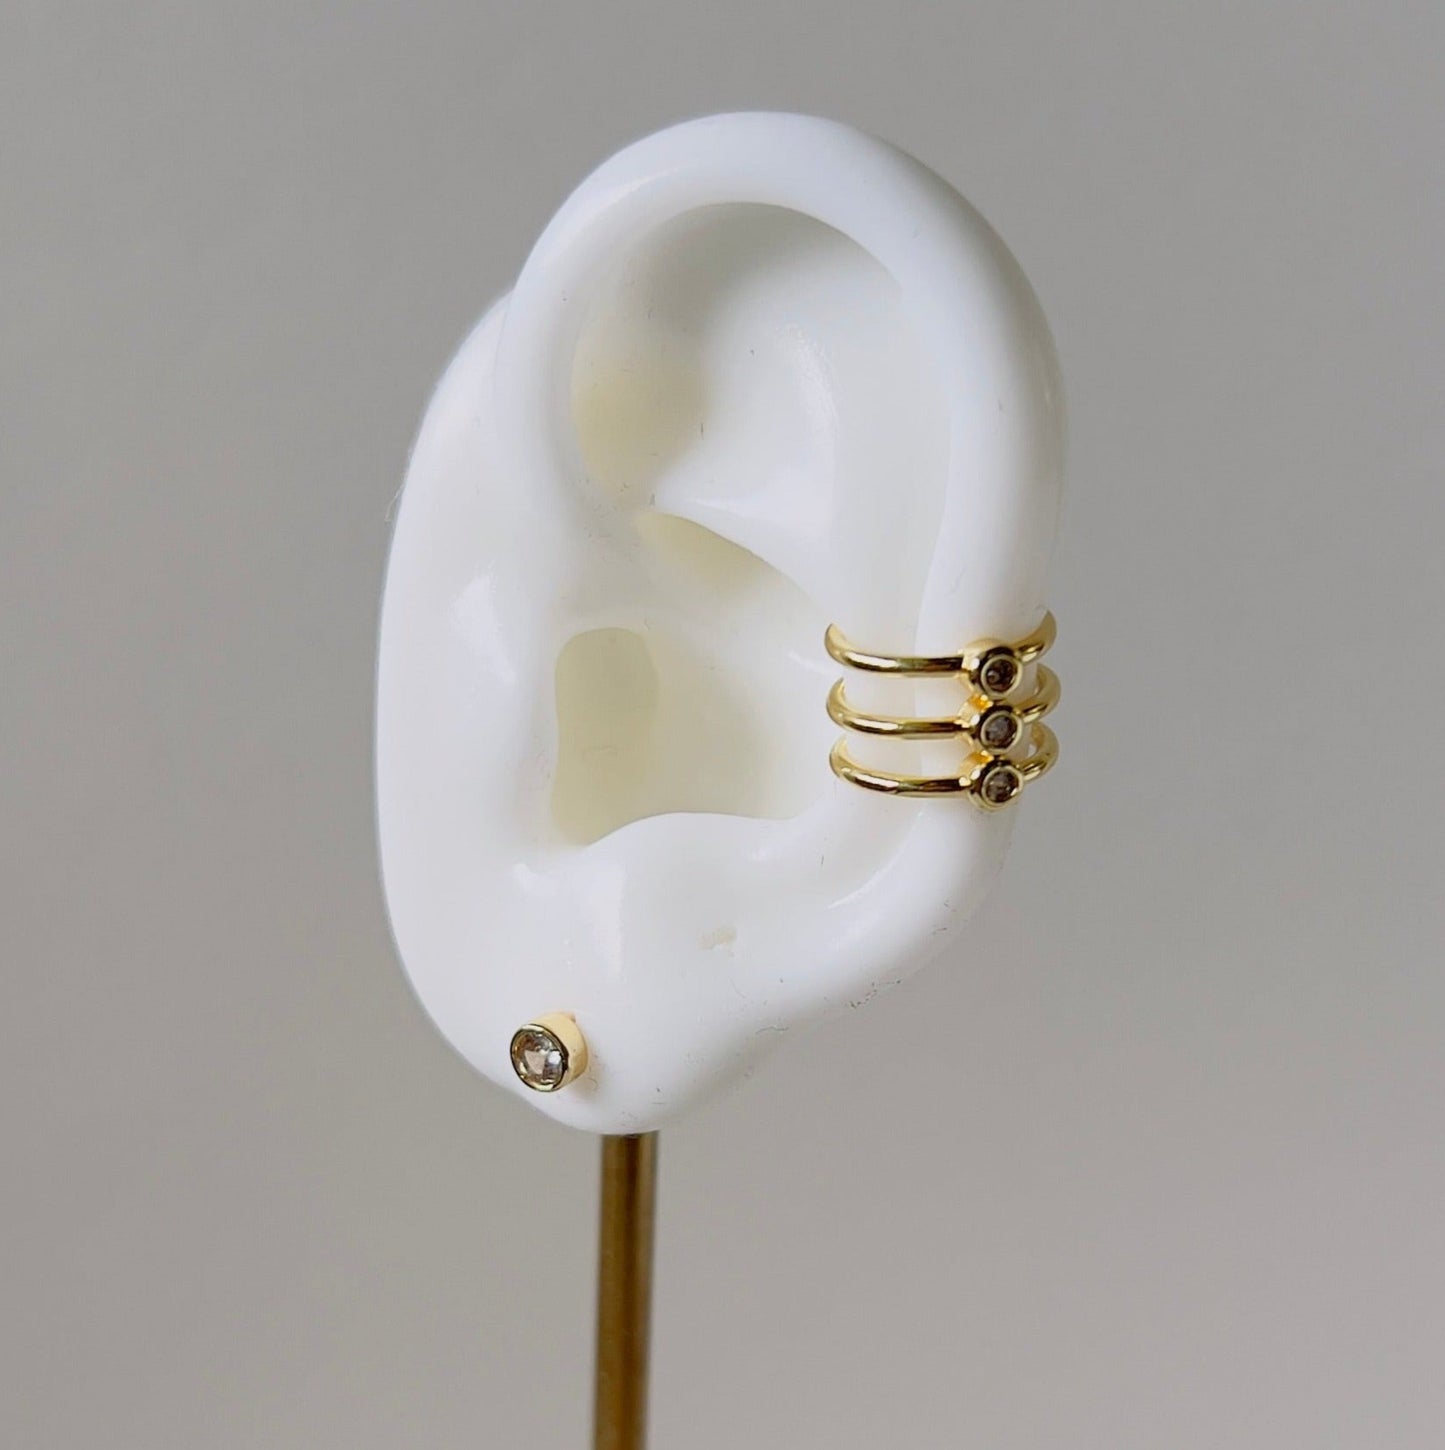 Chic ear cuff featuring three wires and cubic zirconia detail - Perfect for a modern and fashionable look